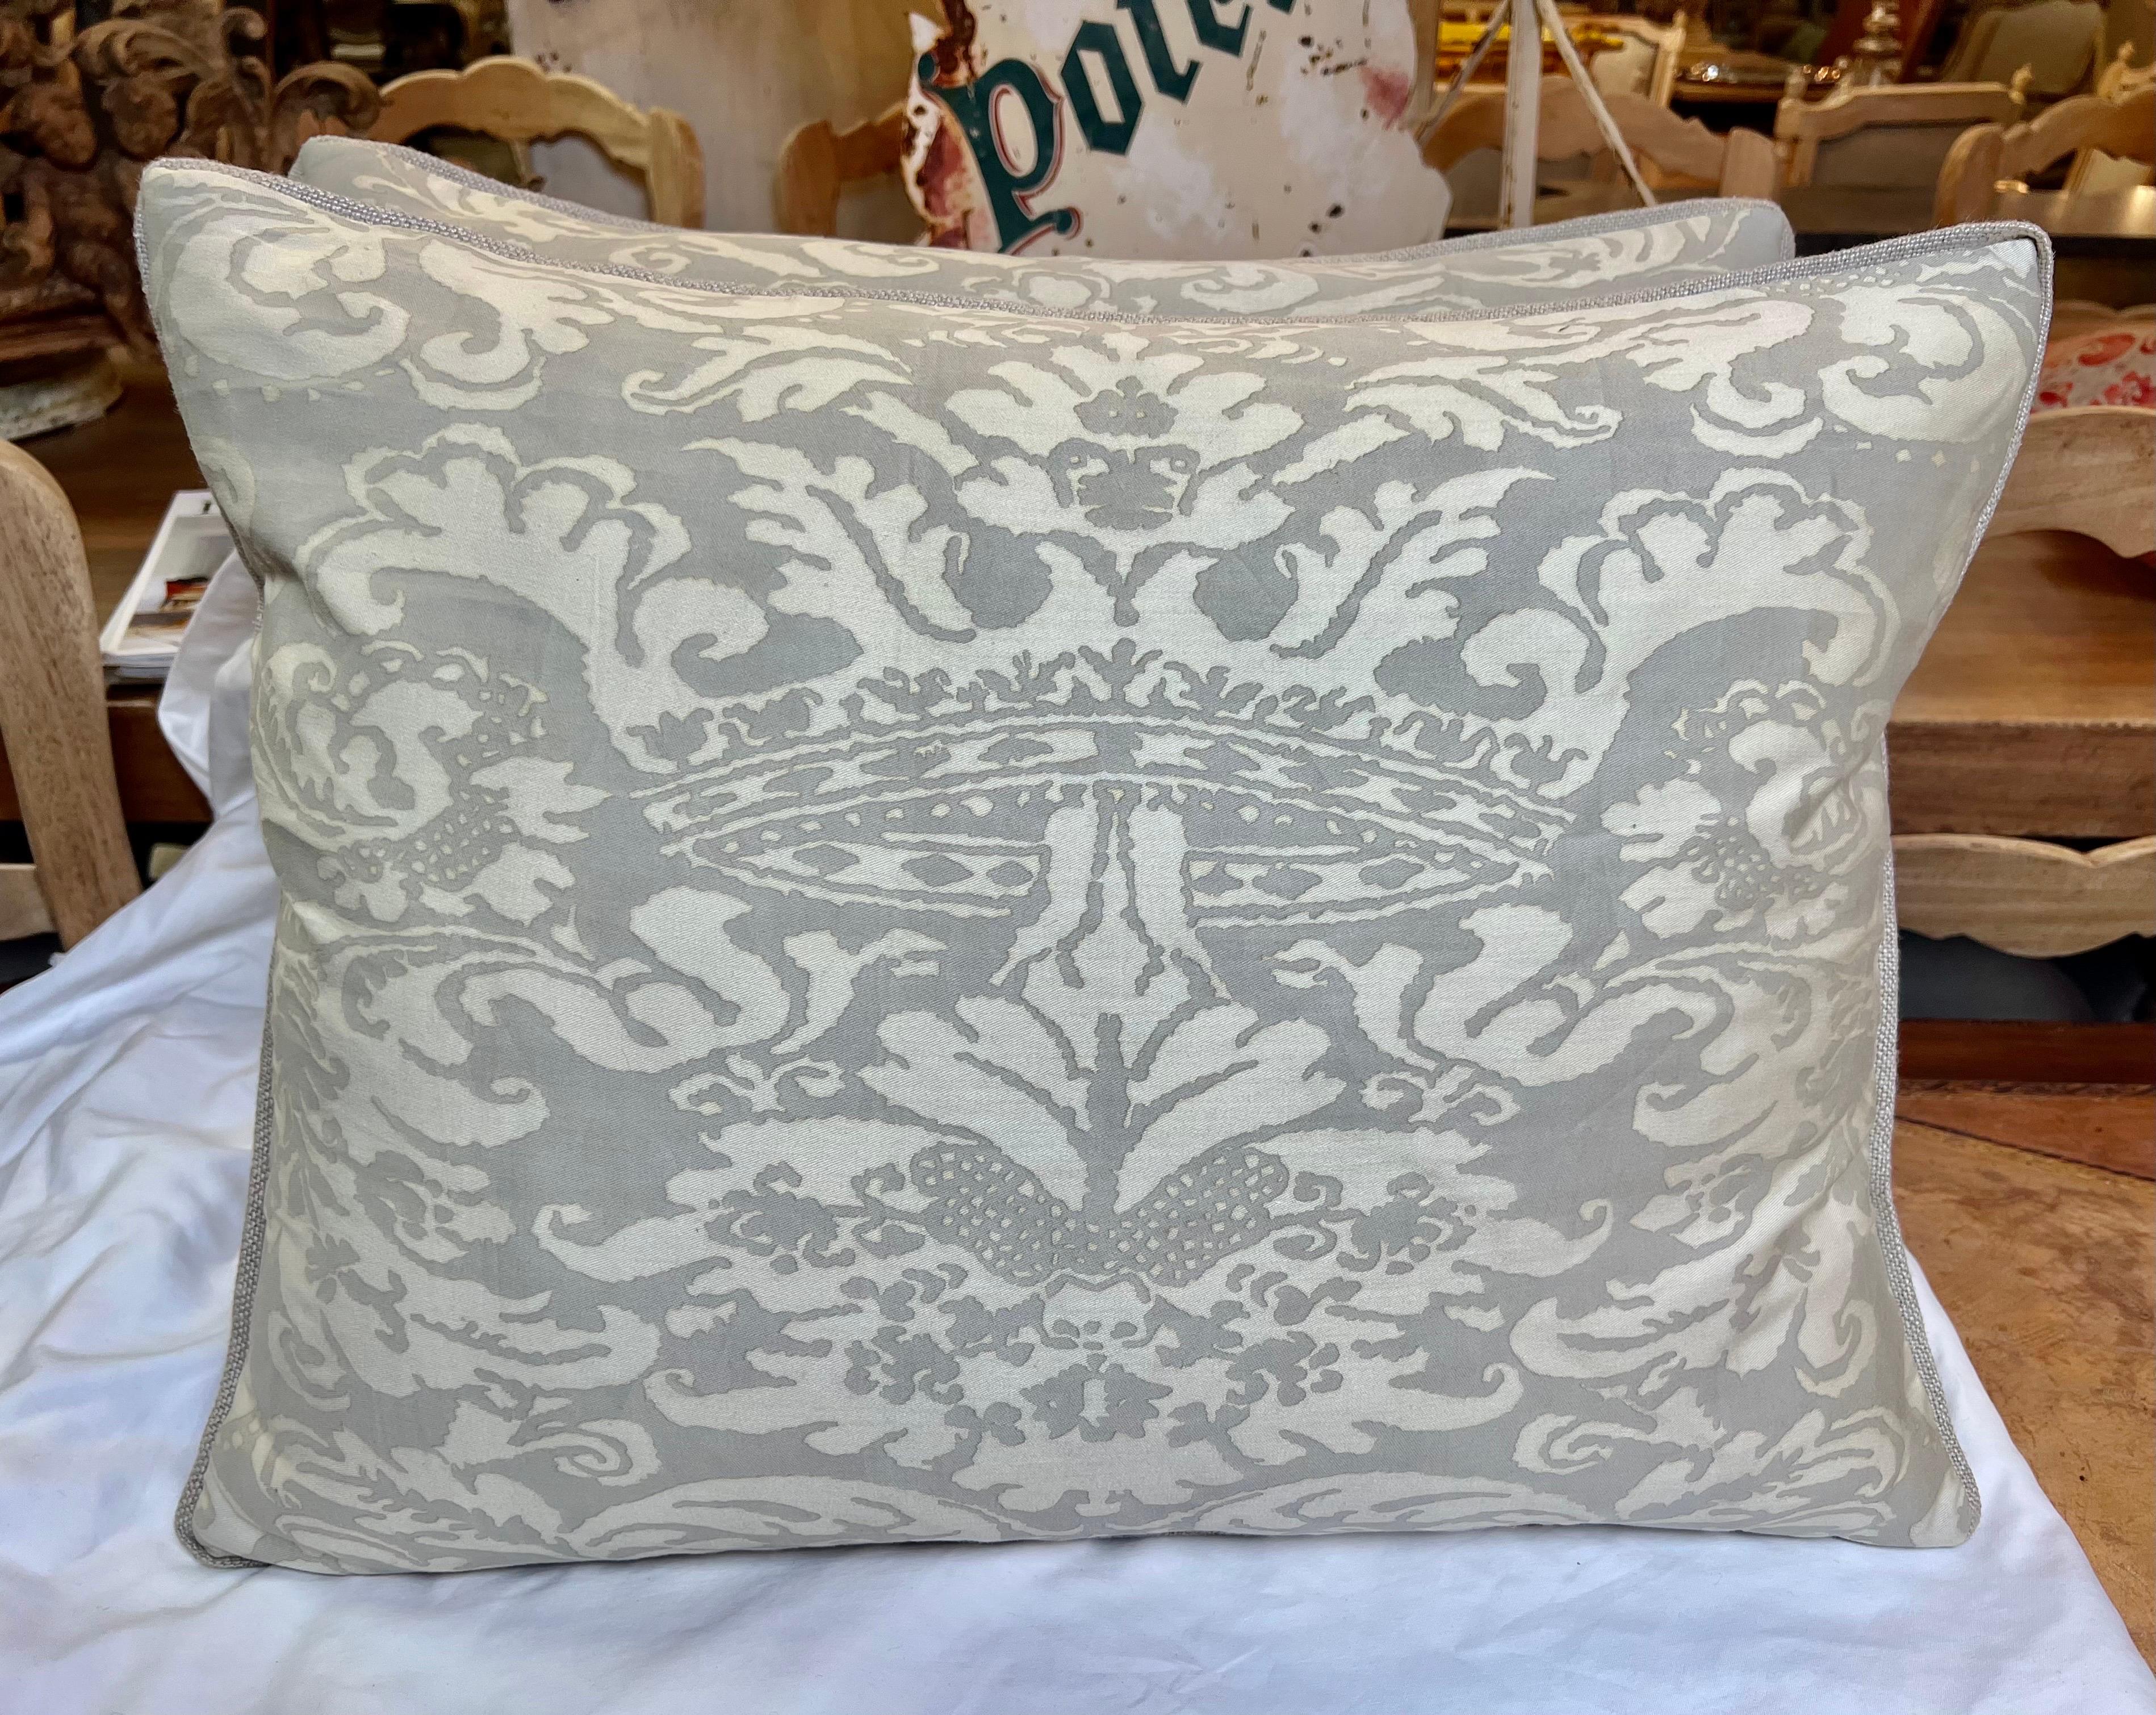 Custom pair of cream & soft gray colored pillows made with authentic Corone Patterned Fortuny textile fronts and Belgium linen backs. Down inserts. Zipper closures.